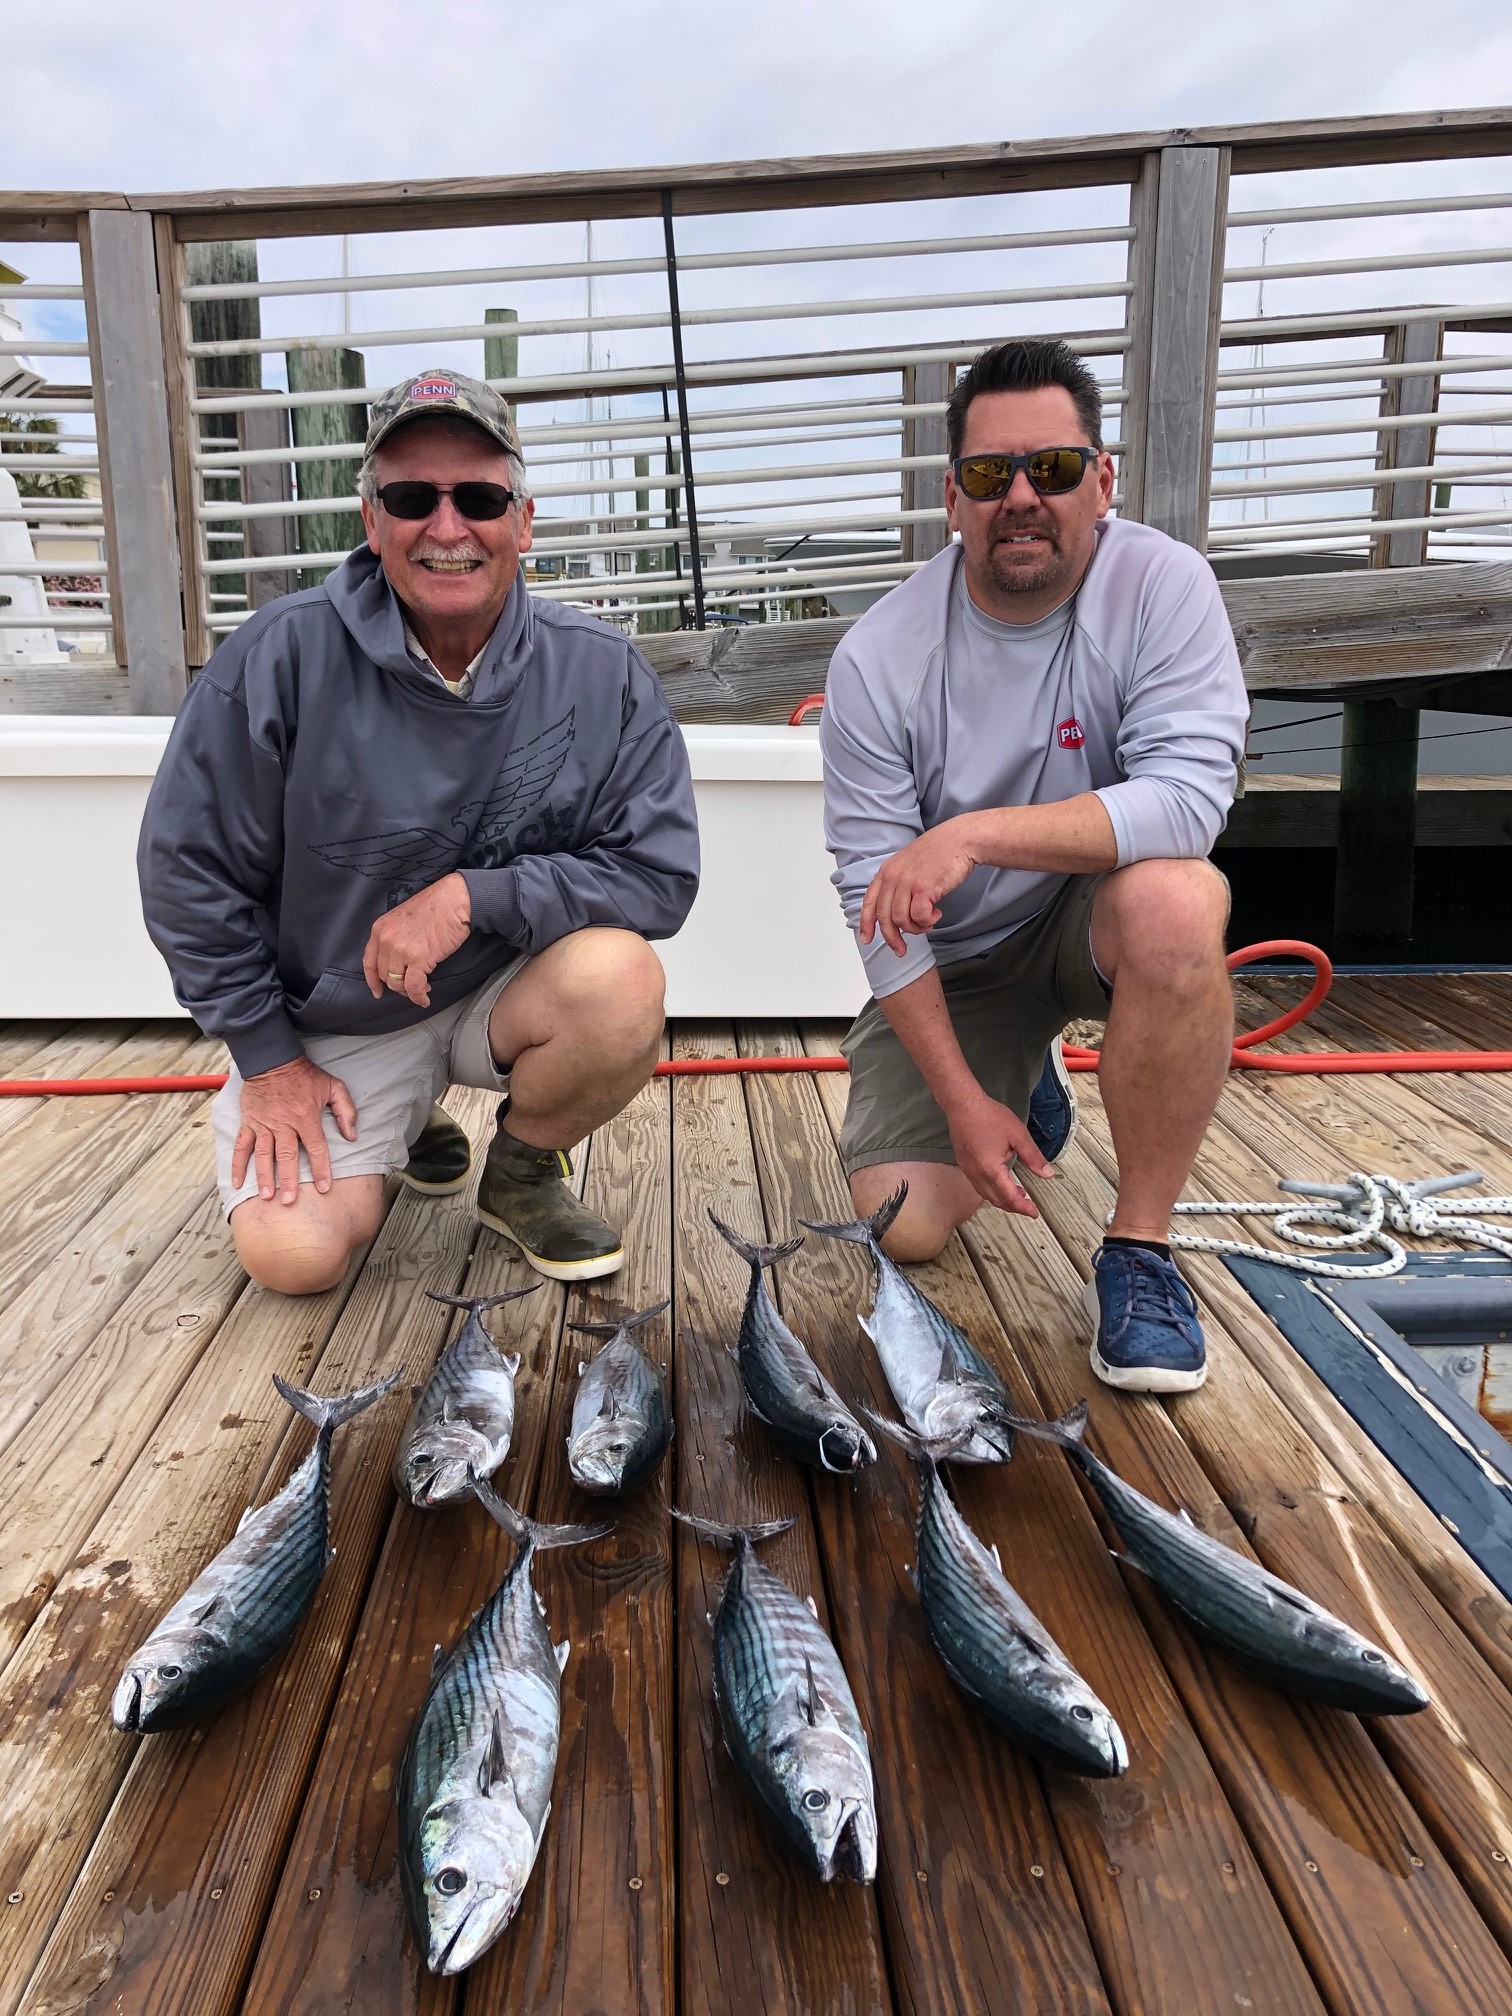 Wrightsville Beach, NC Fishing Forecast-April 2020 - Wrightsville Beach  Fishing Report with Capt. Jot Owens